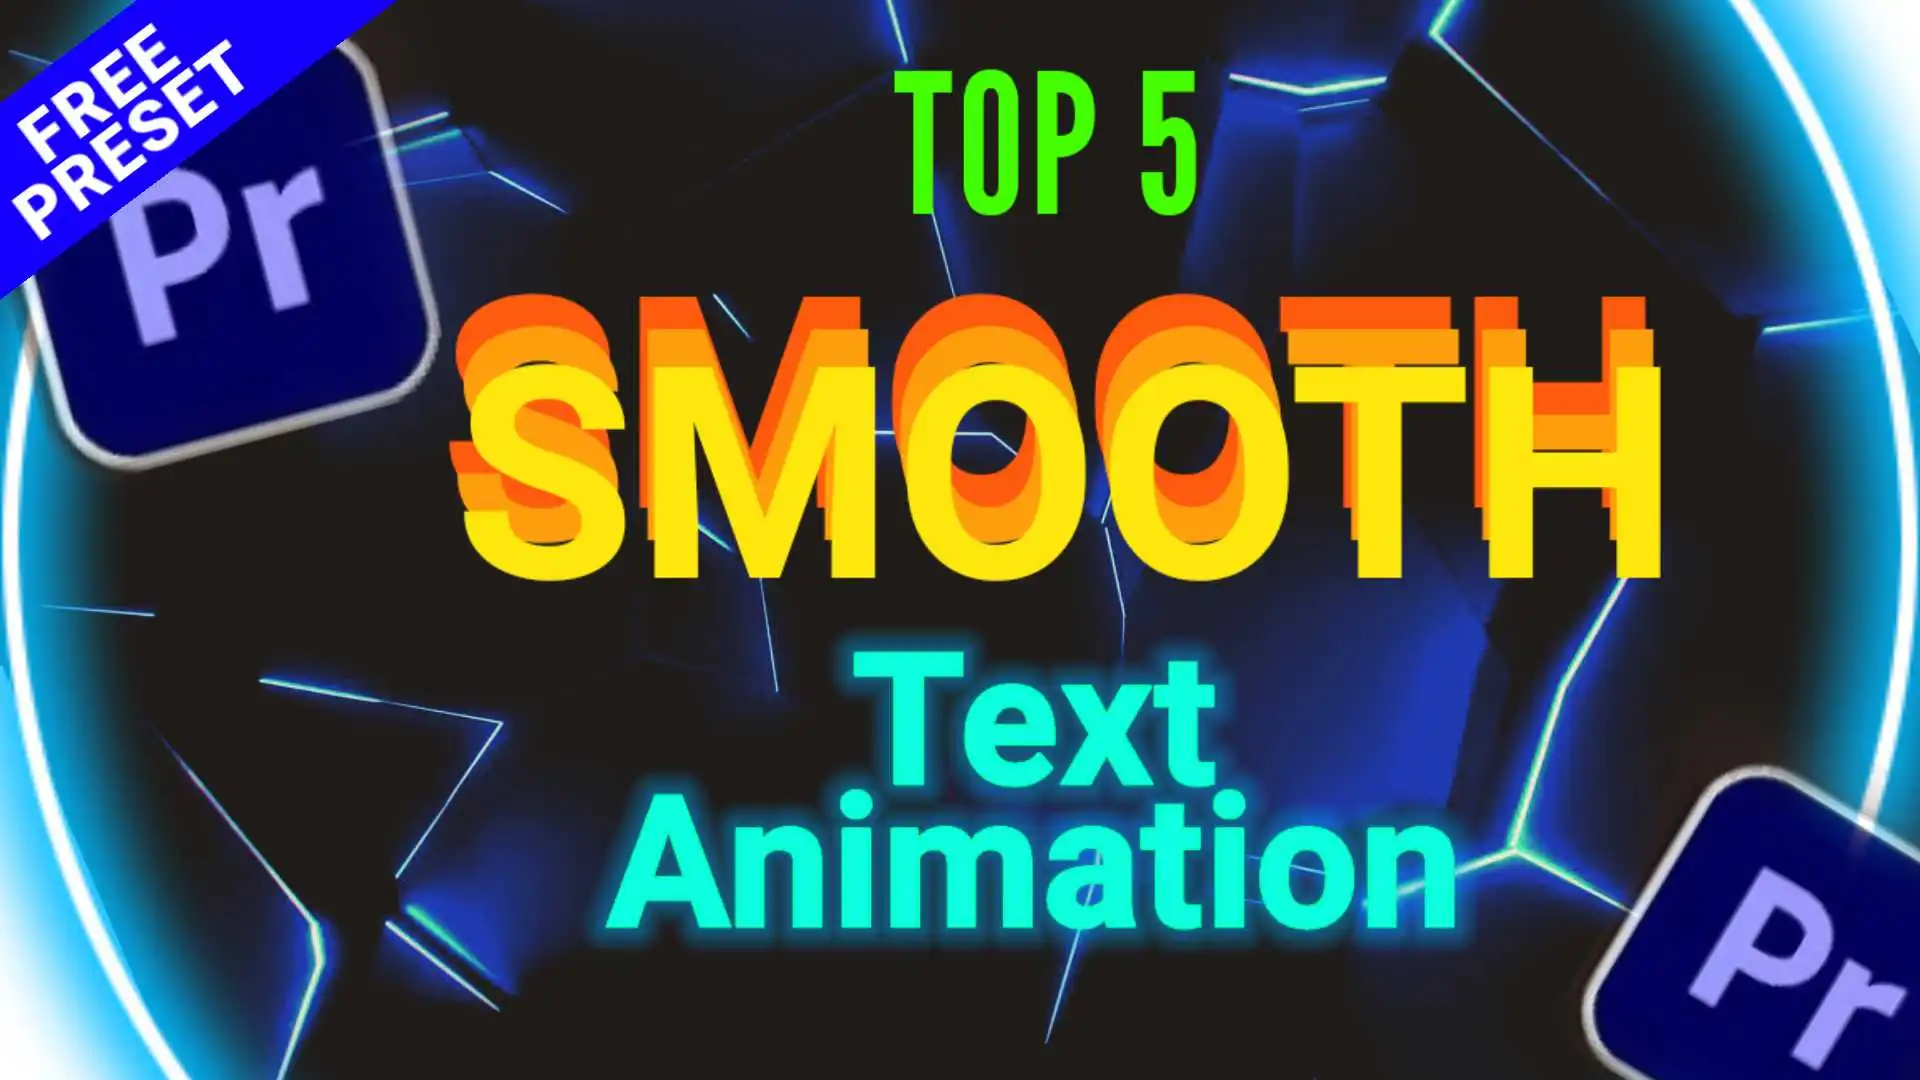 Smooth Text Animation Premiere Pro Presets Free Download